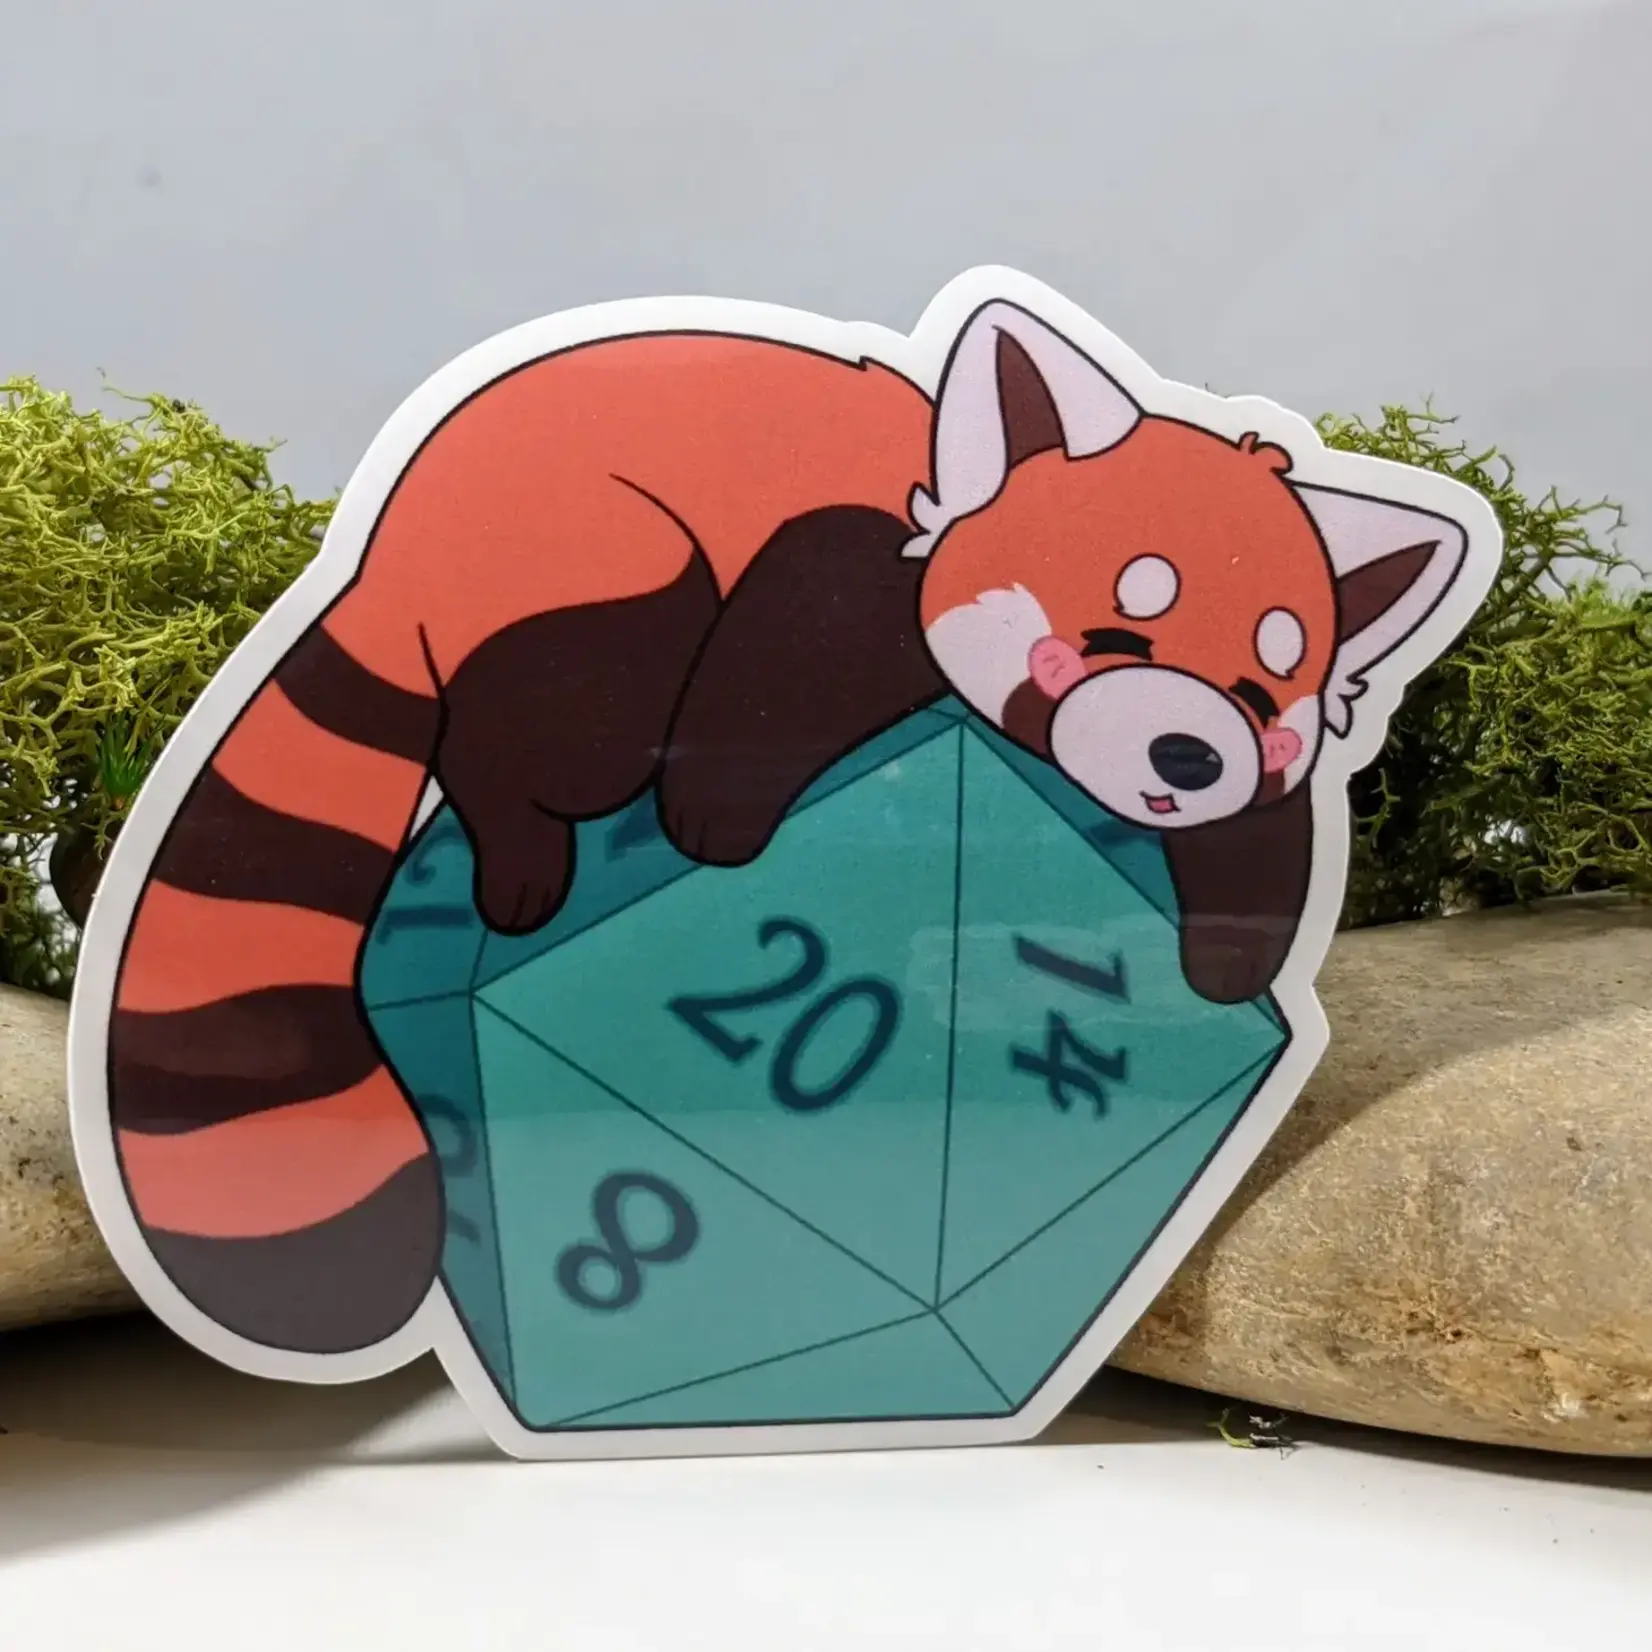 Mimic Gaming Co Sticker: Sleepy Red Panda on Polyhedral D20 Dice (2.5")